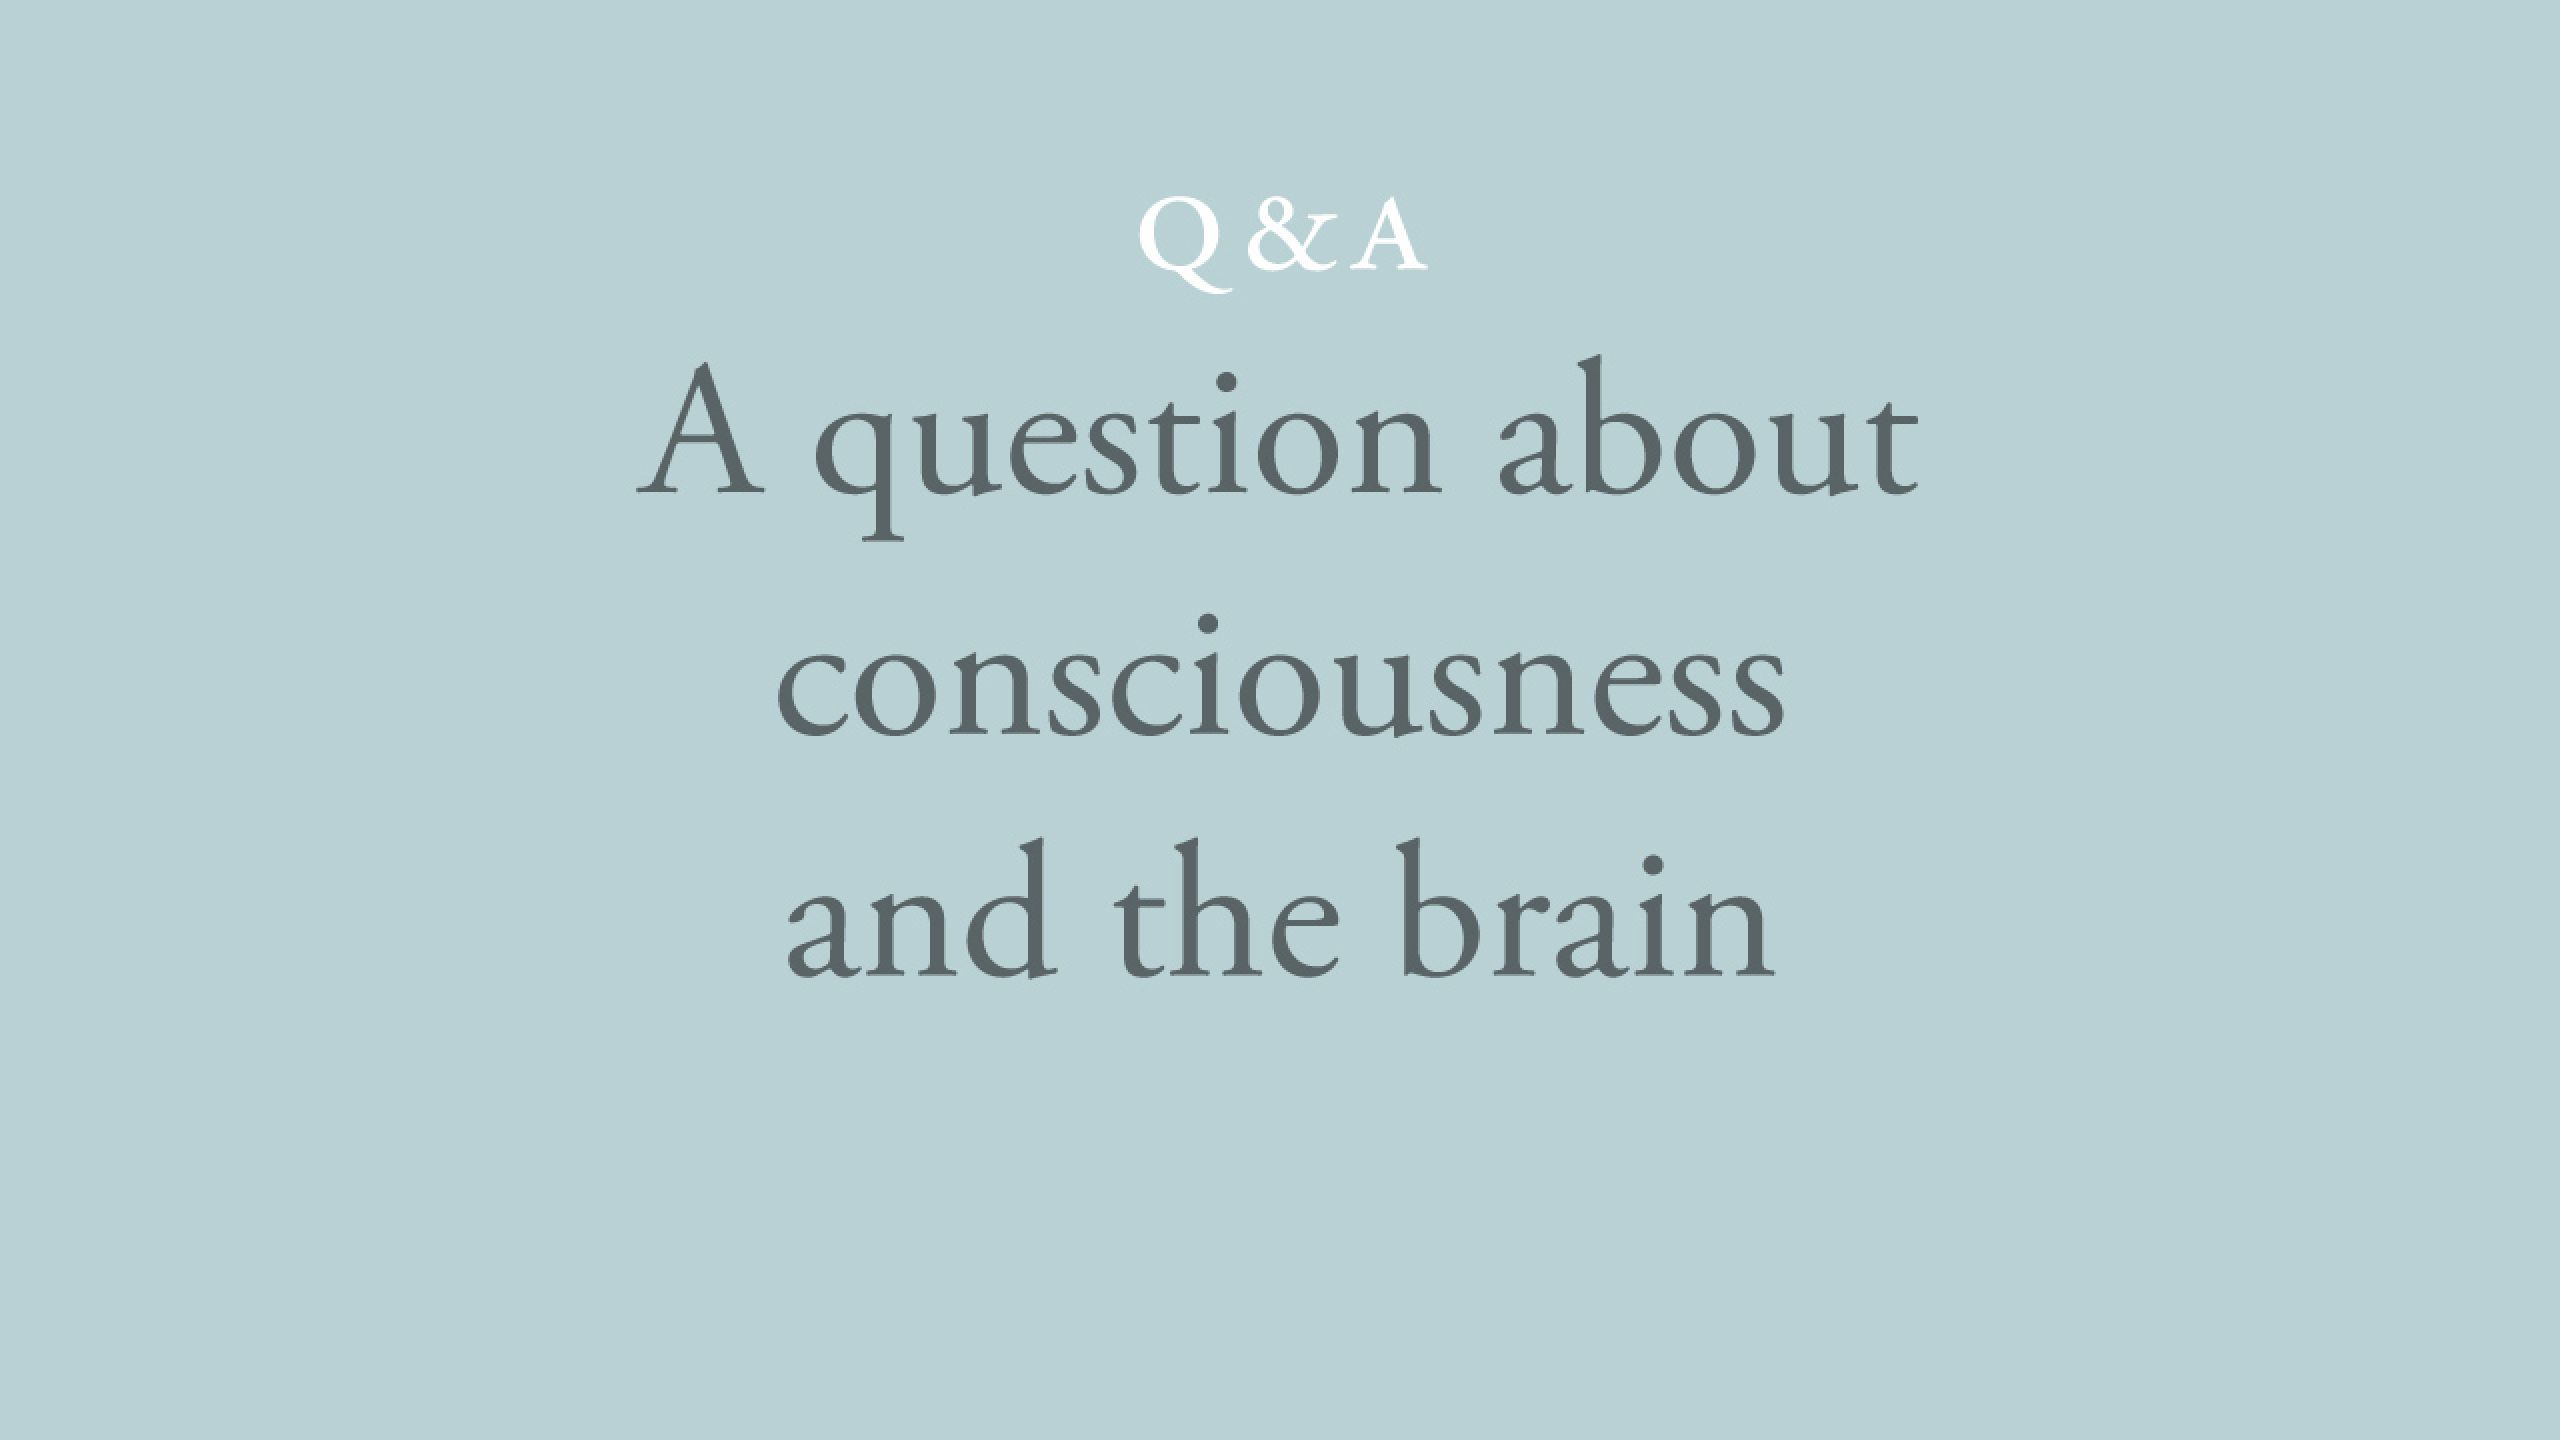 Does consciousness require a functional human brain to be aware of itself?